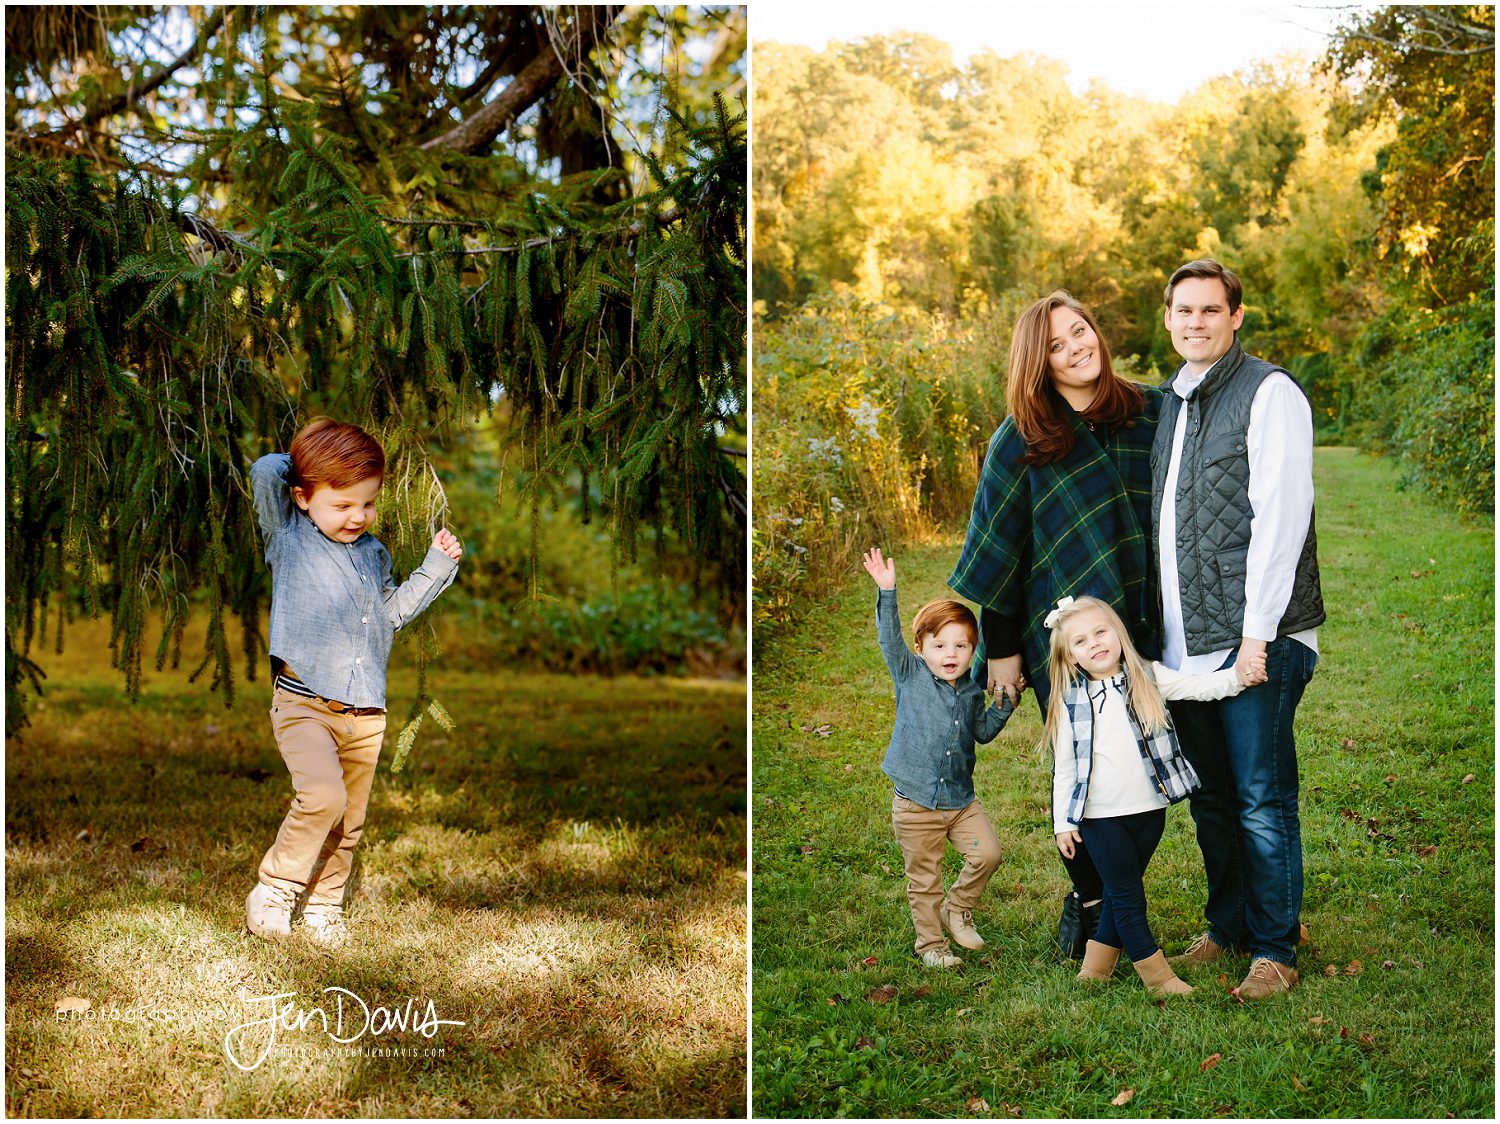 Family pictures in the park